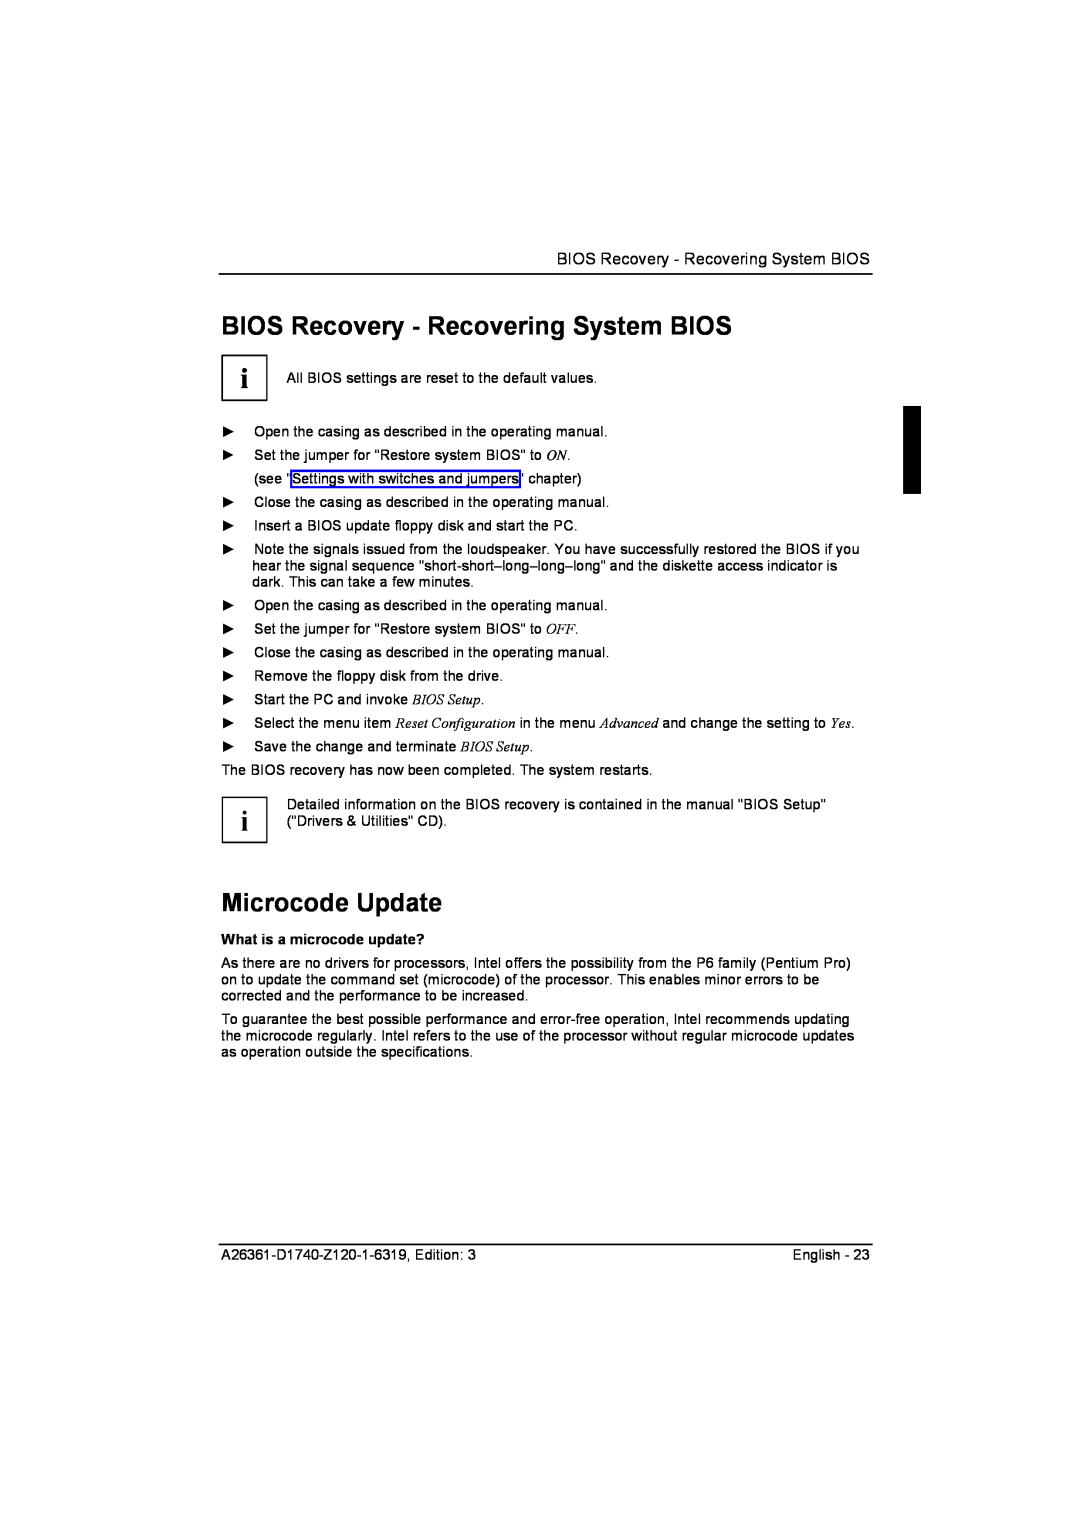 Fujitsu D1740 technical manual BIOS Recovery - Recovering System BIOS, Microcode Update, What is a microcode update? 